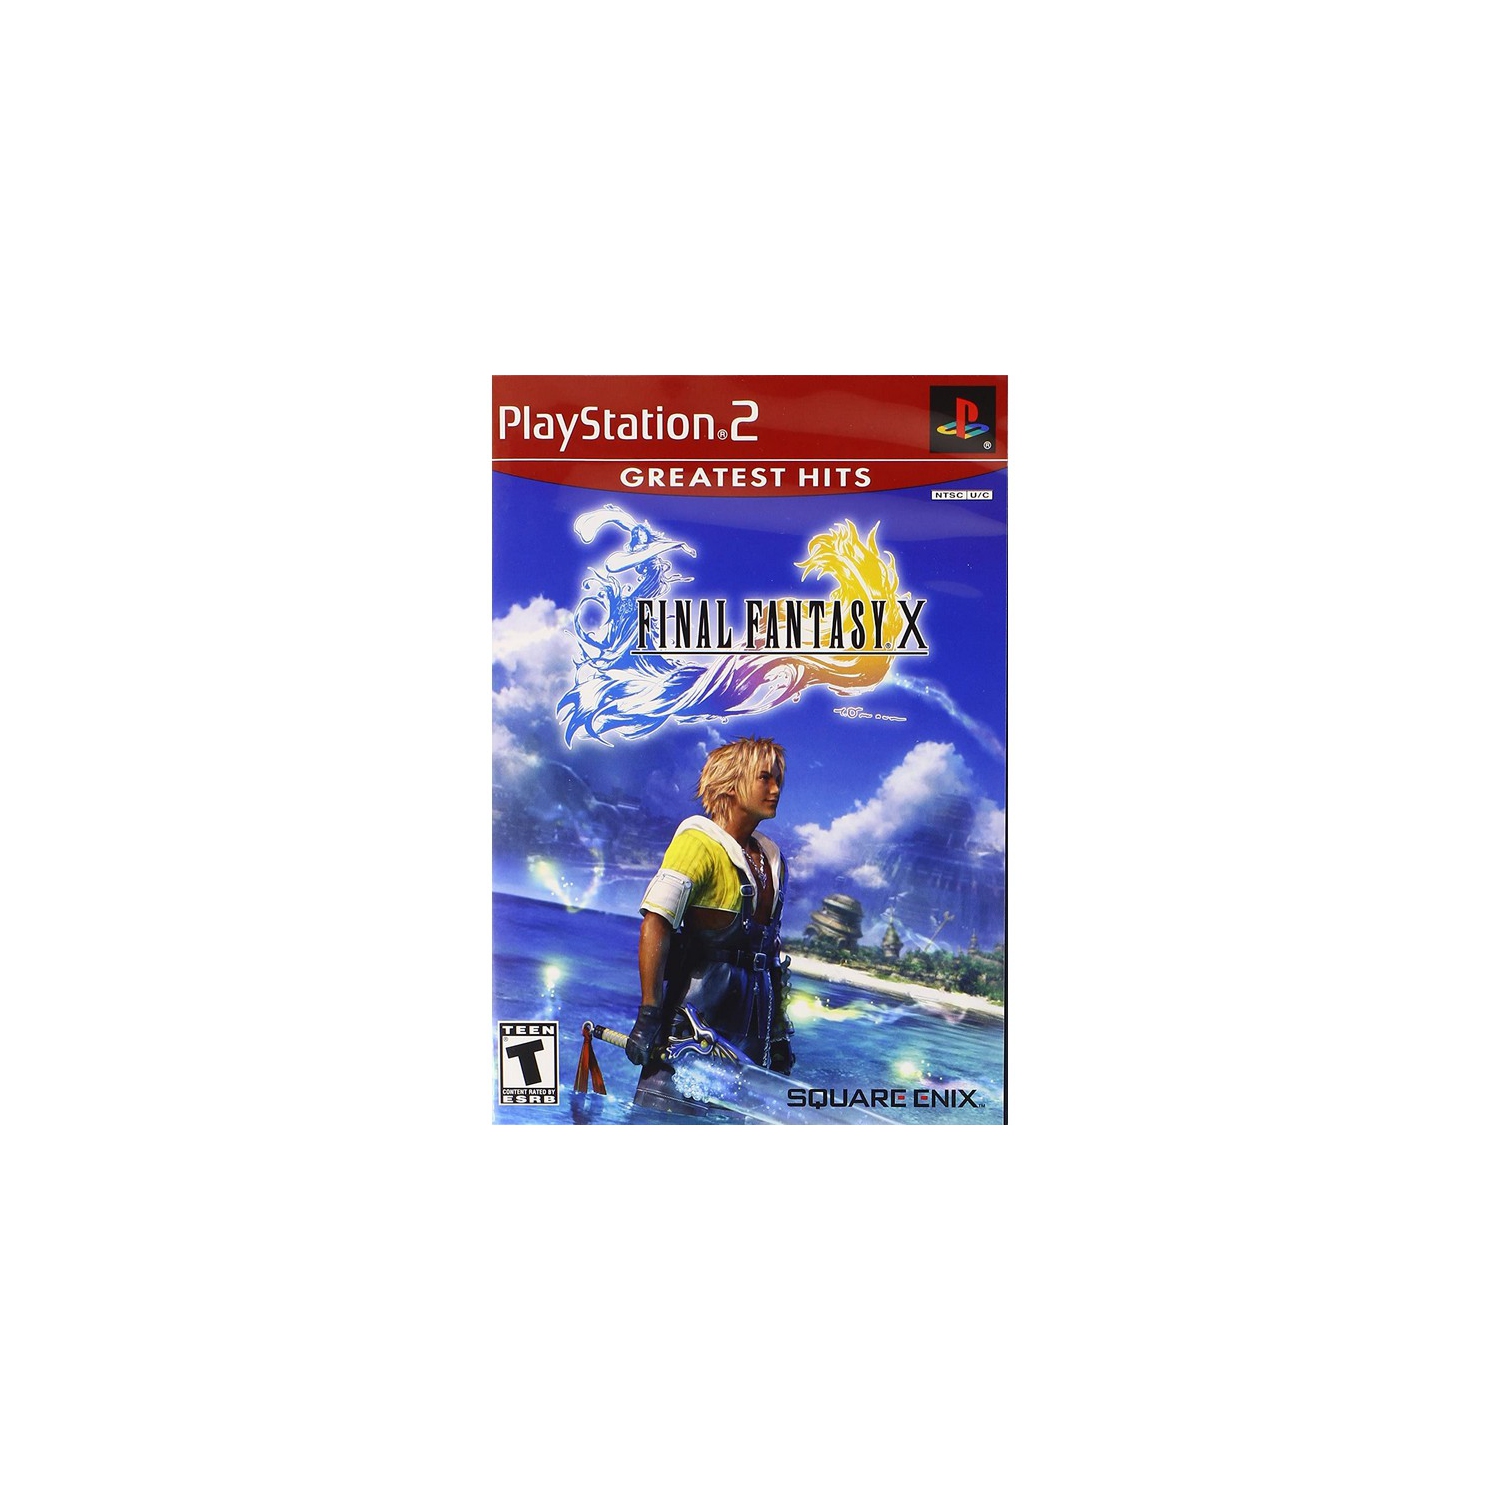 Final Fantasy X 10 (PlayStation 2 PS2 Game) Complete, final fantasy x 